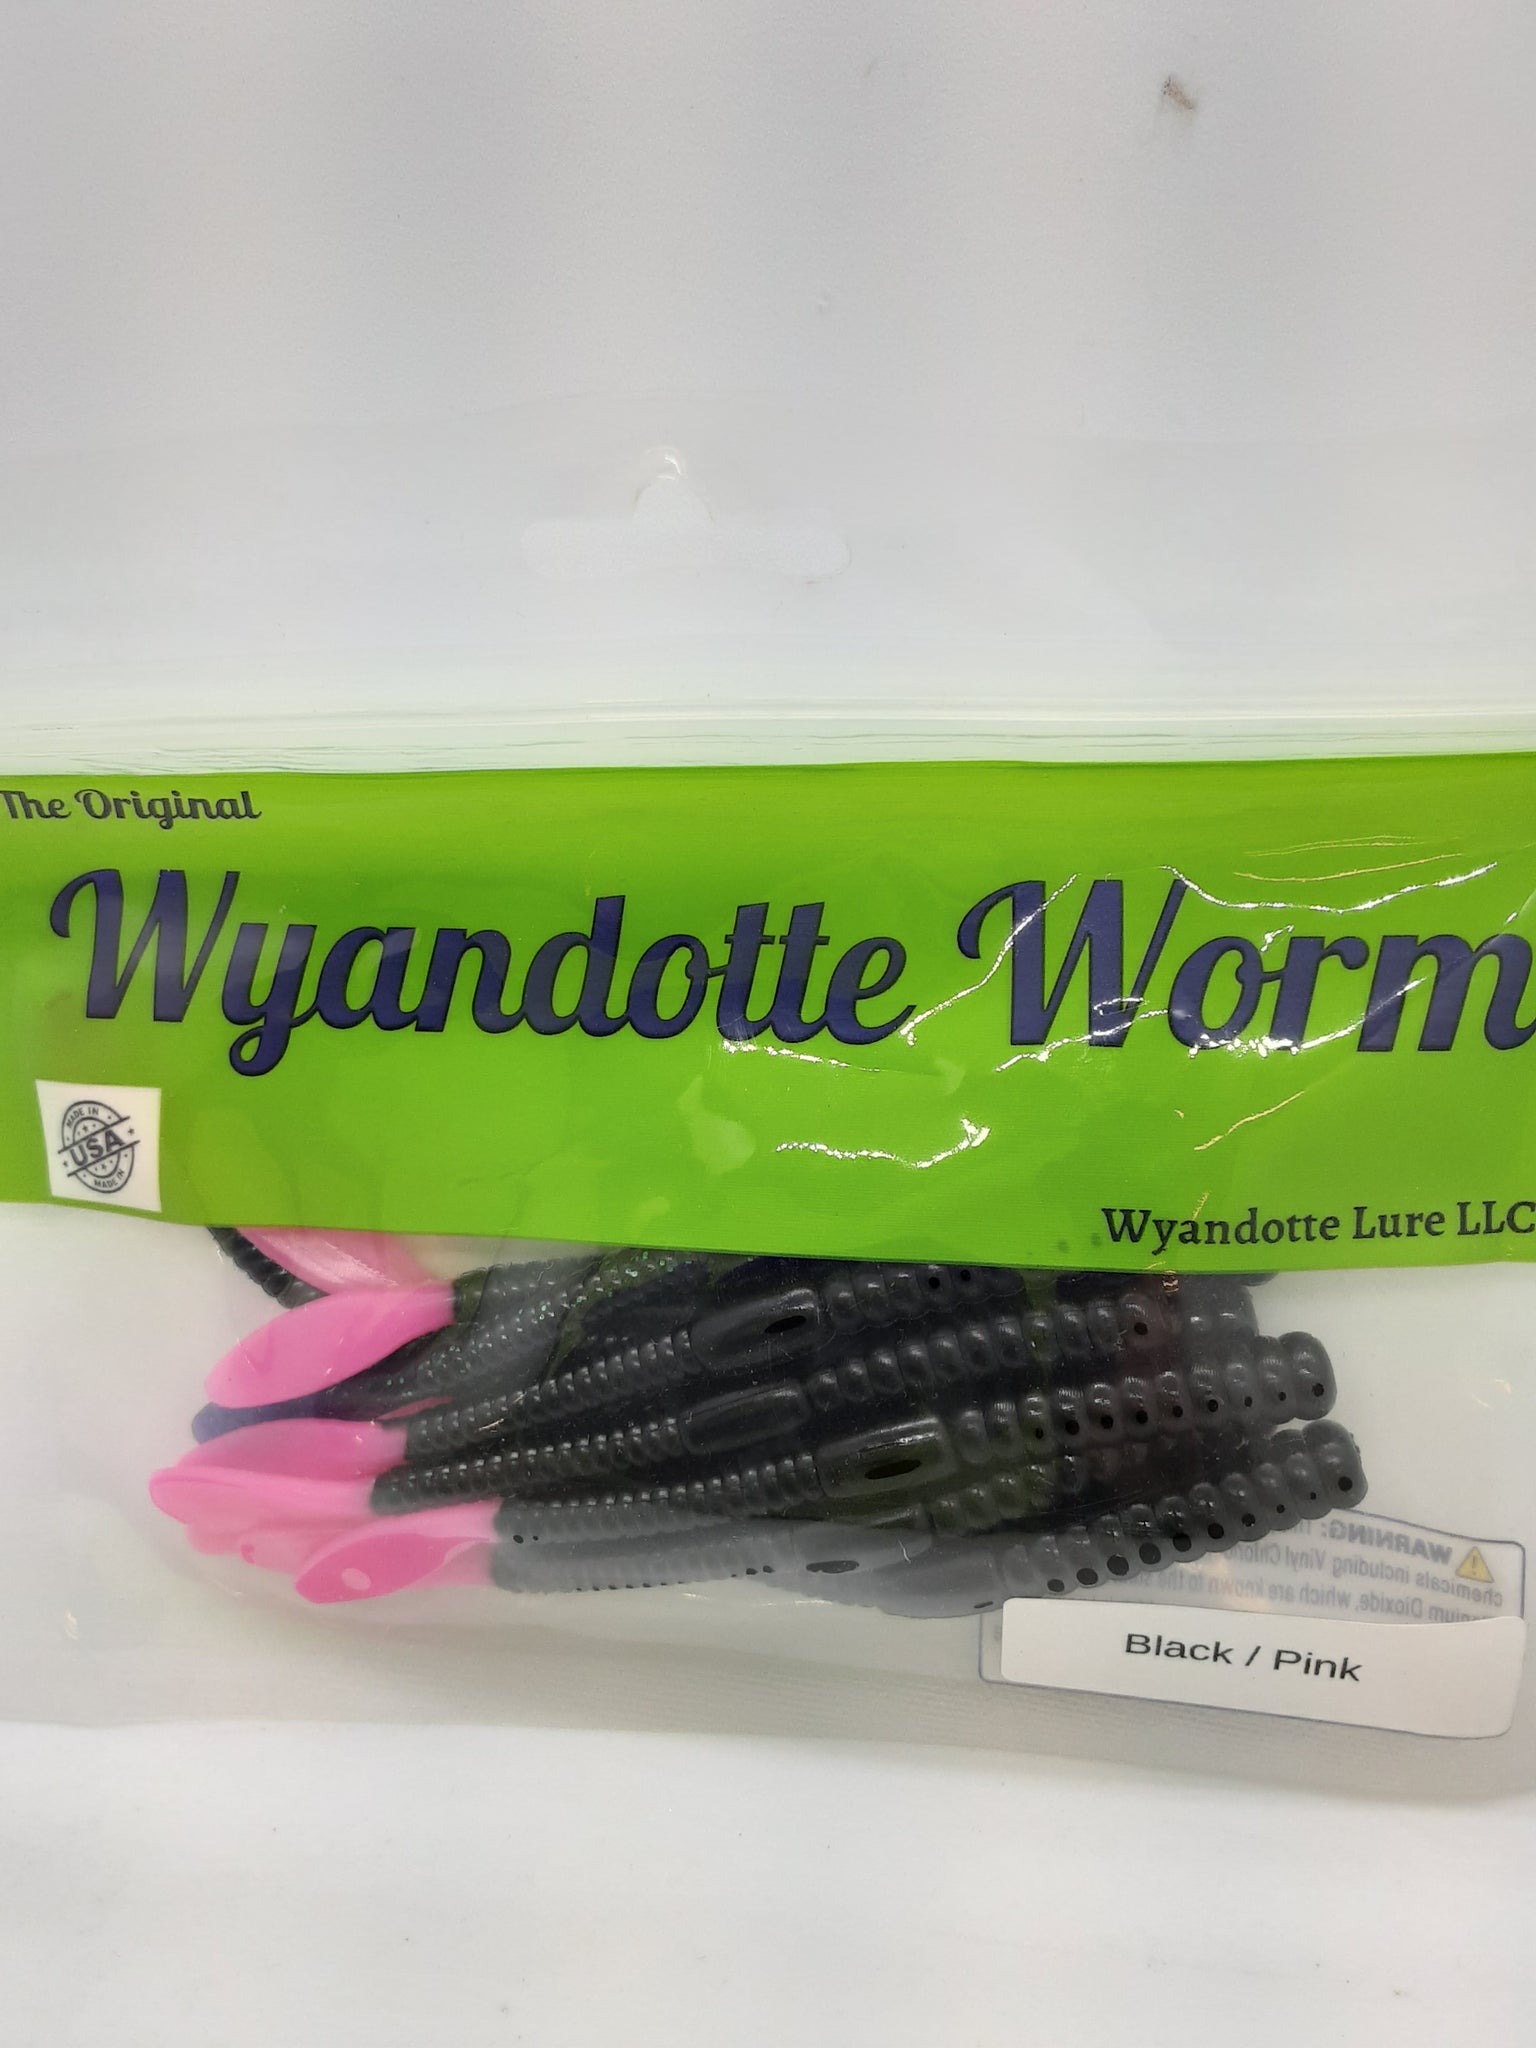 4 Wyandotte Worms, ONE Pack (20 ct) for Walleye,Bass,Jigging, Made in USA  #WDW